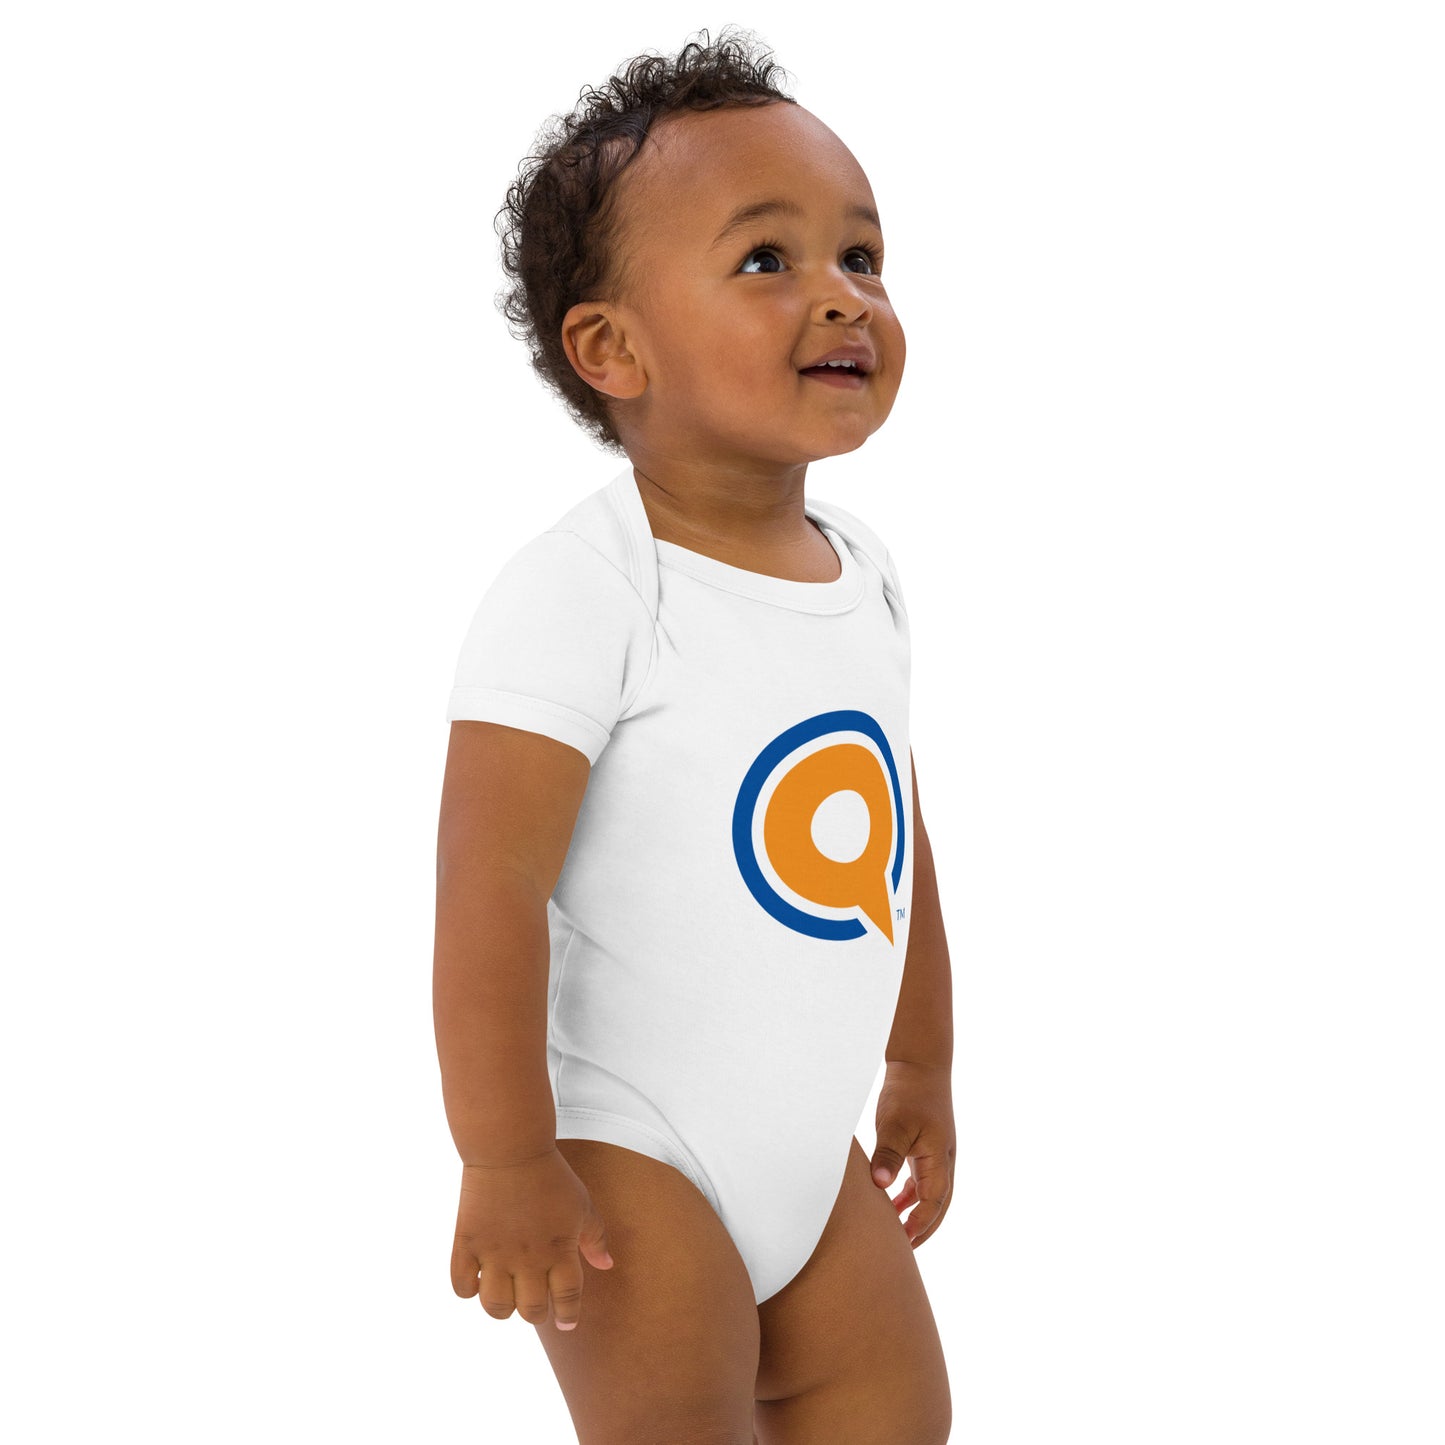 Yaqeen Q Baby Onesie in White